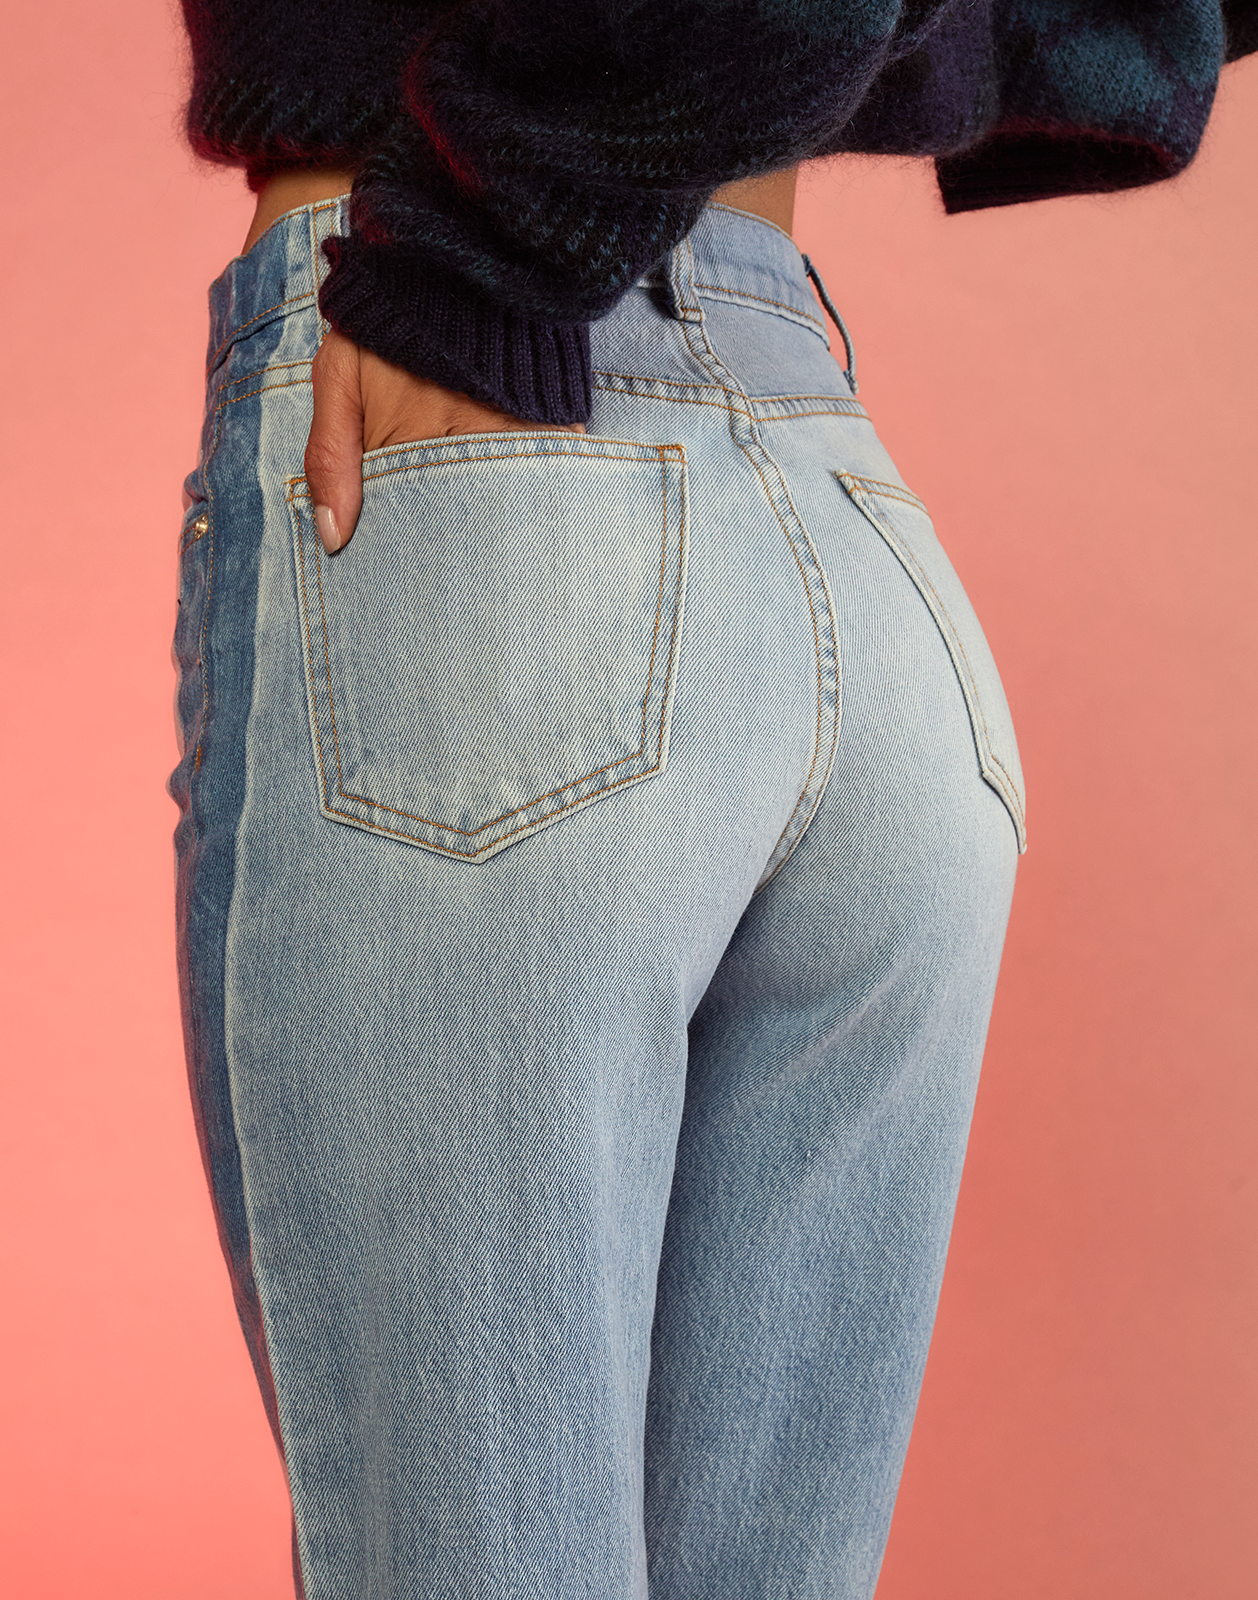 The Perfect Fit Jean